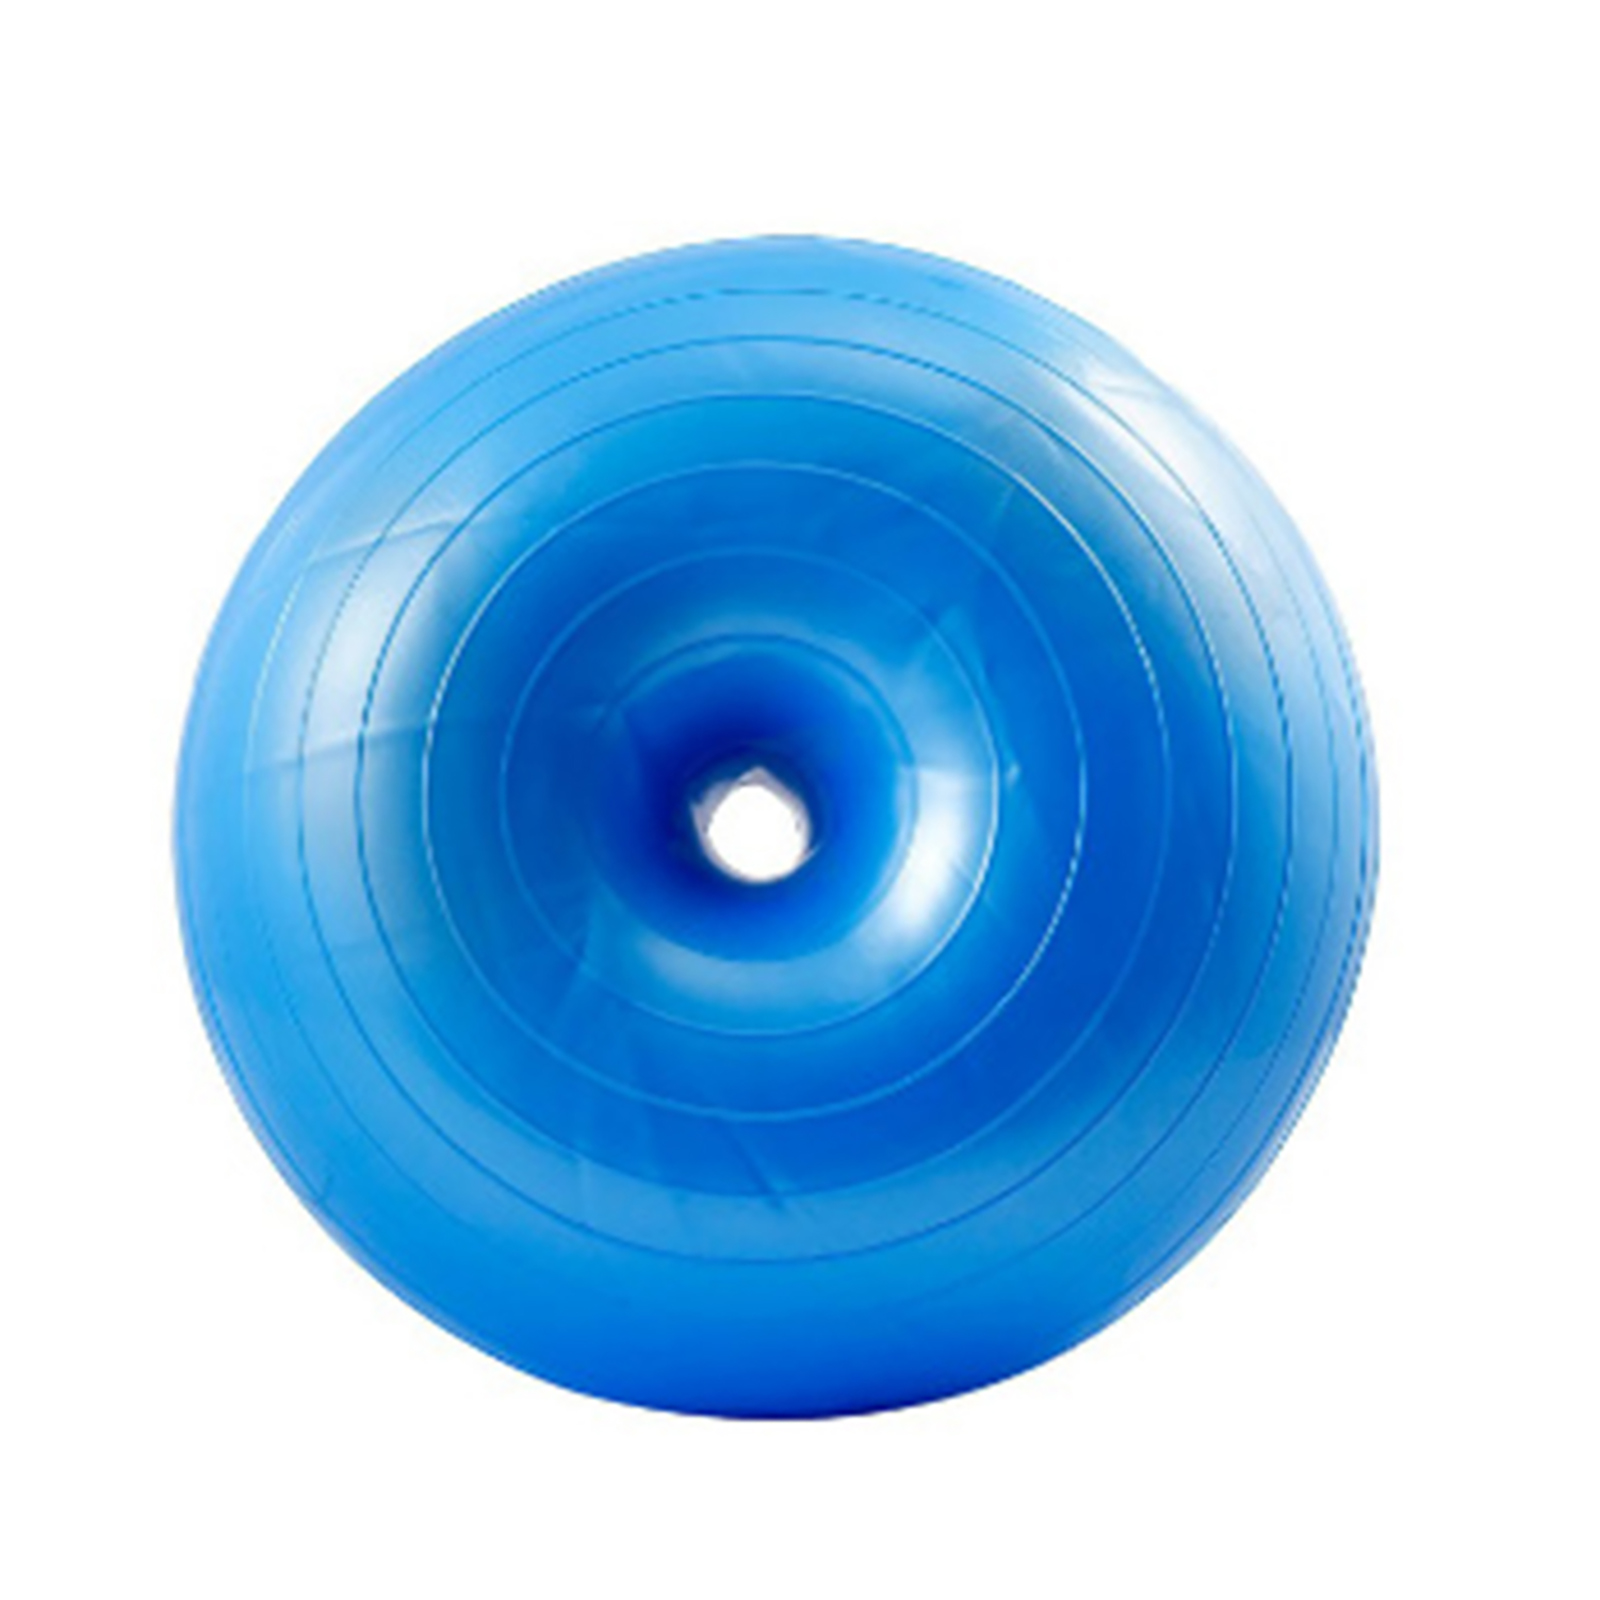 Donut Exercise Ball Workout Core Training Ball Swiss Stability Ball For Yoga Pilates Balance Training In Gym Office Classroom 50cm